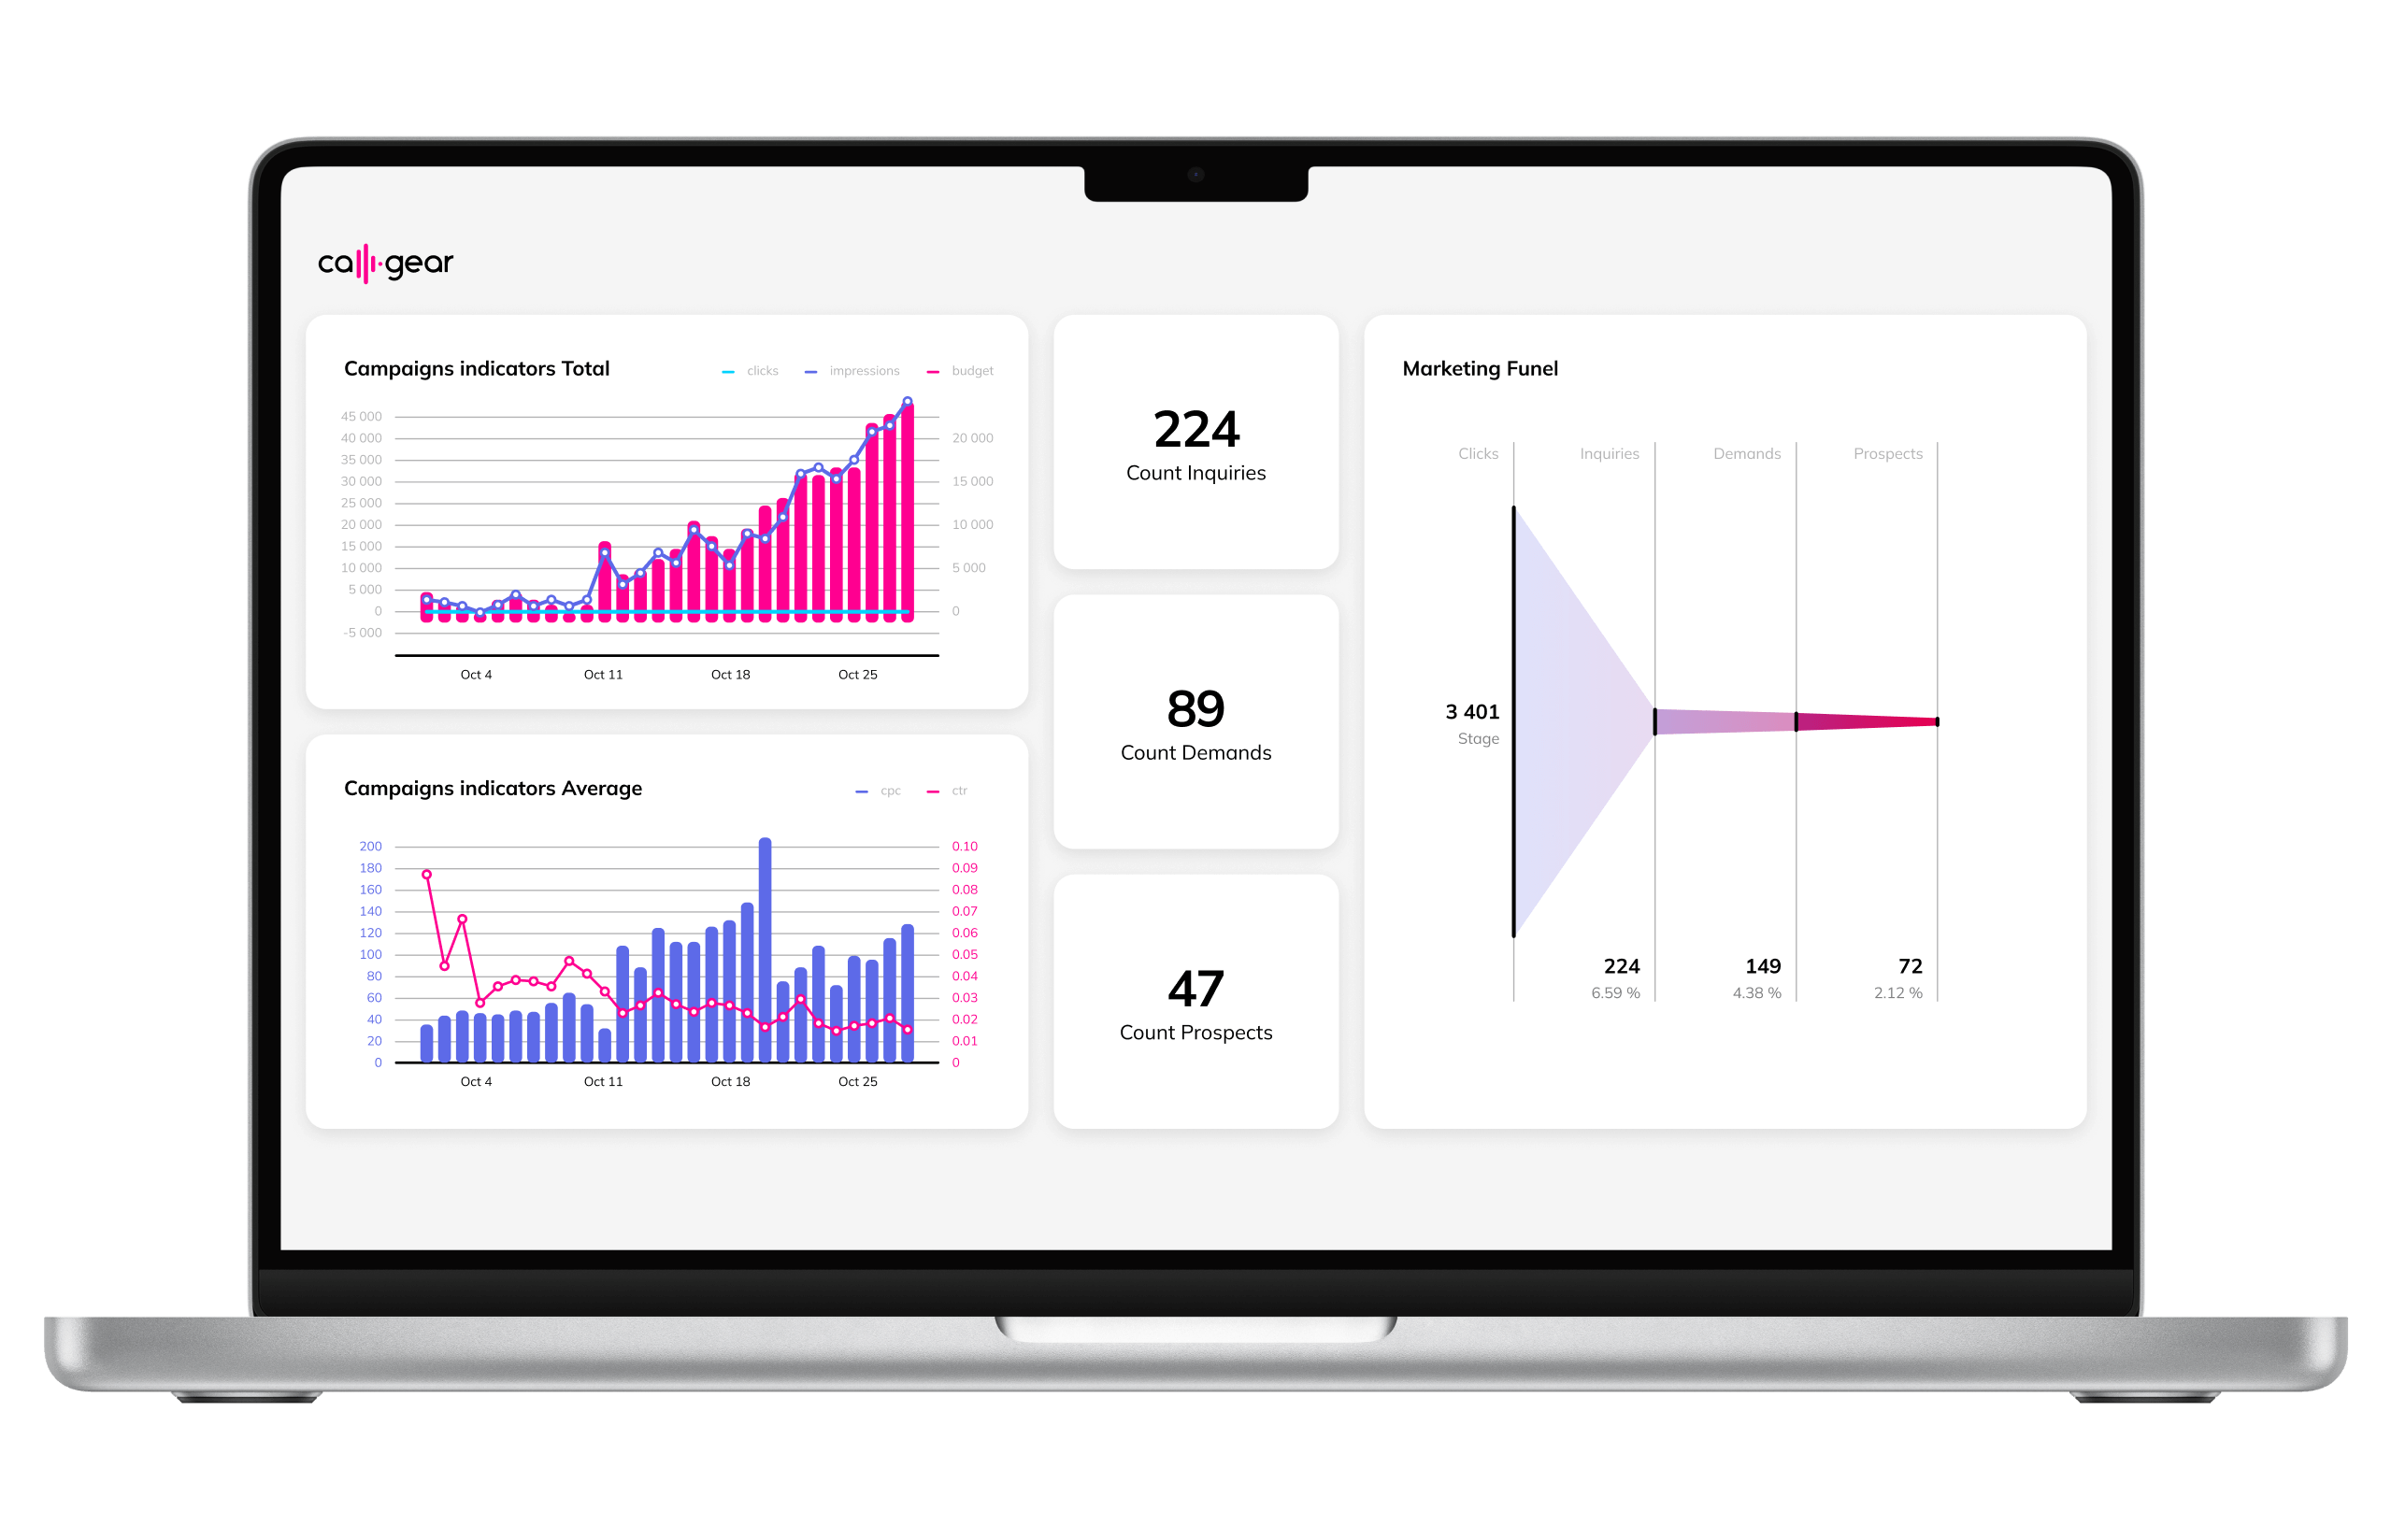 Consolidate and visualize data from different sources